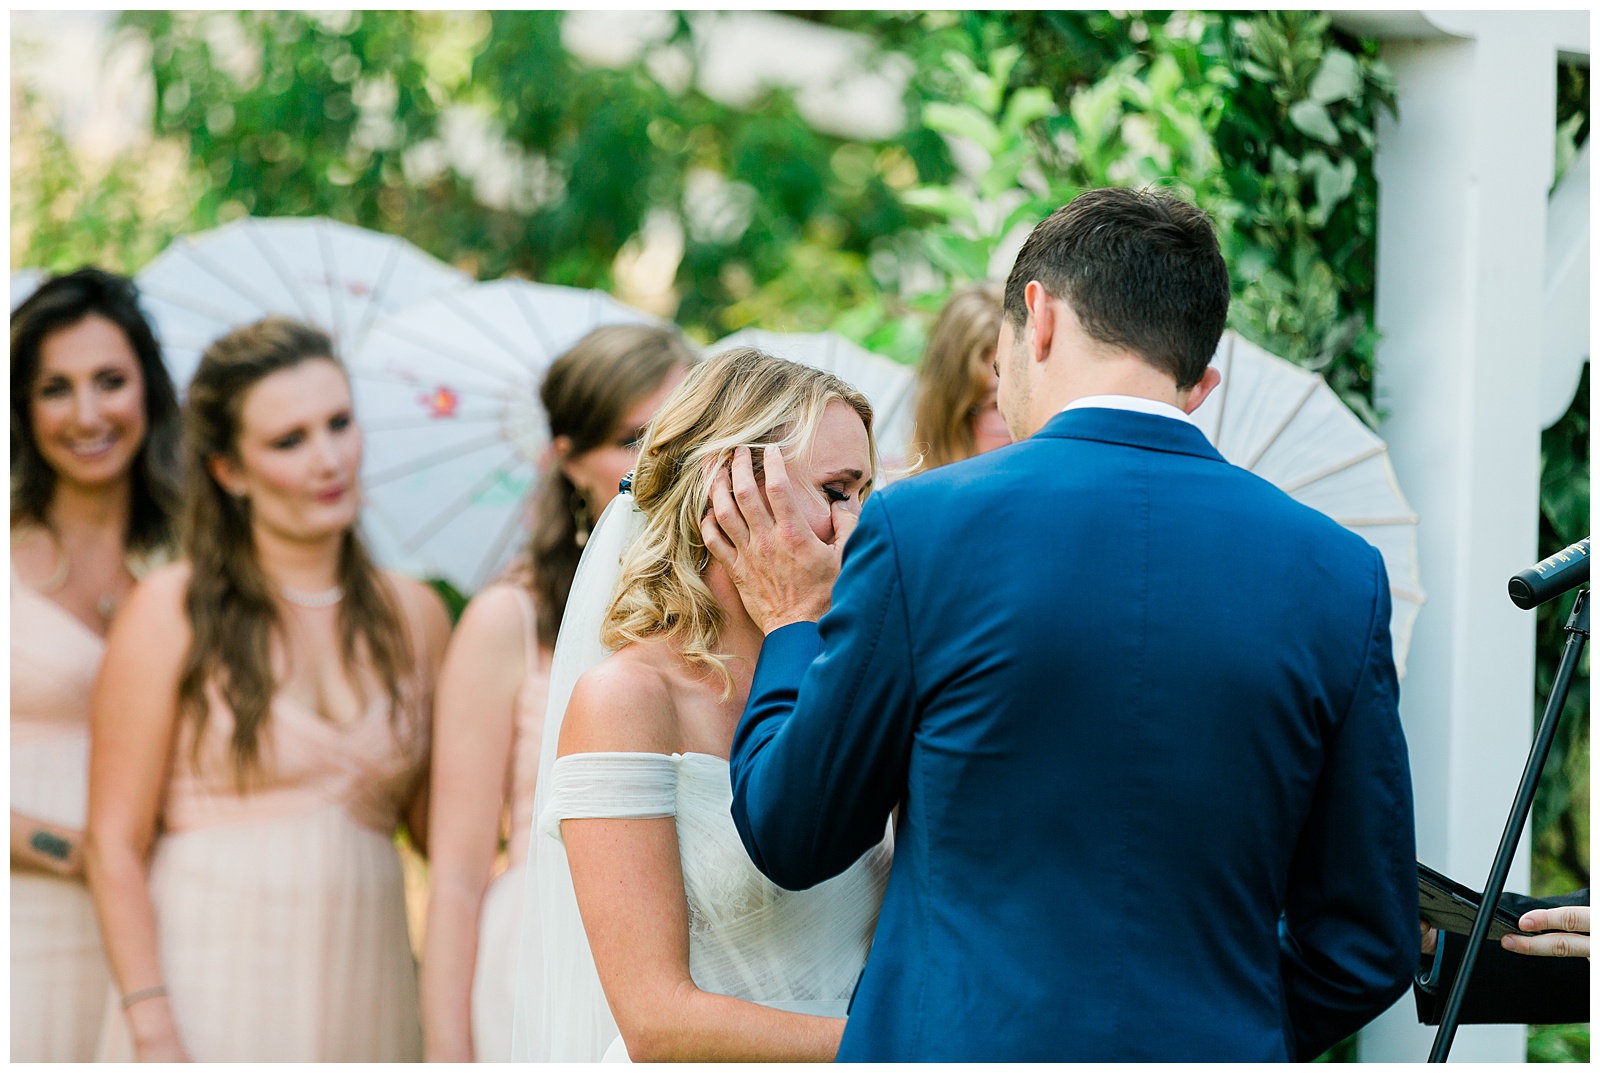 A groom wiping away his Bride's tears during their wedding ceremony